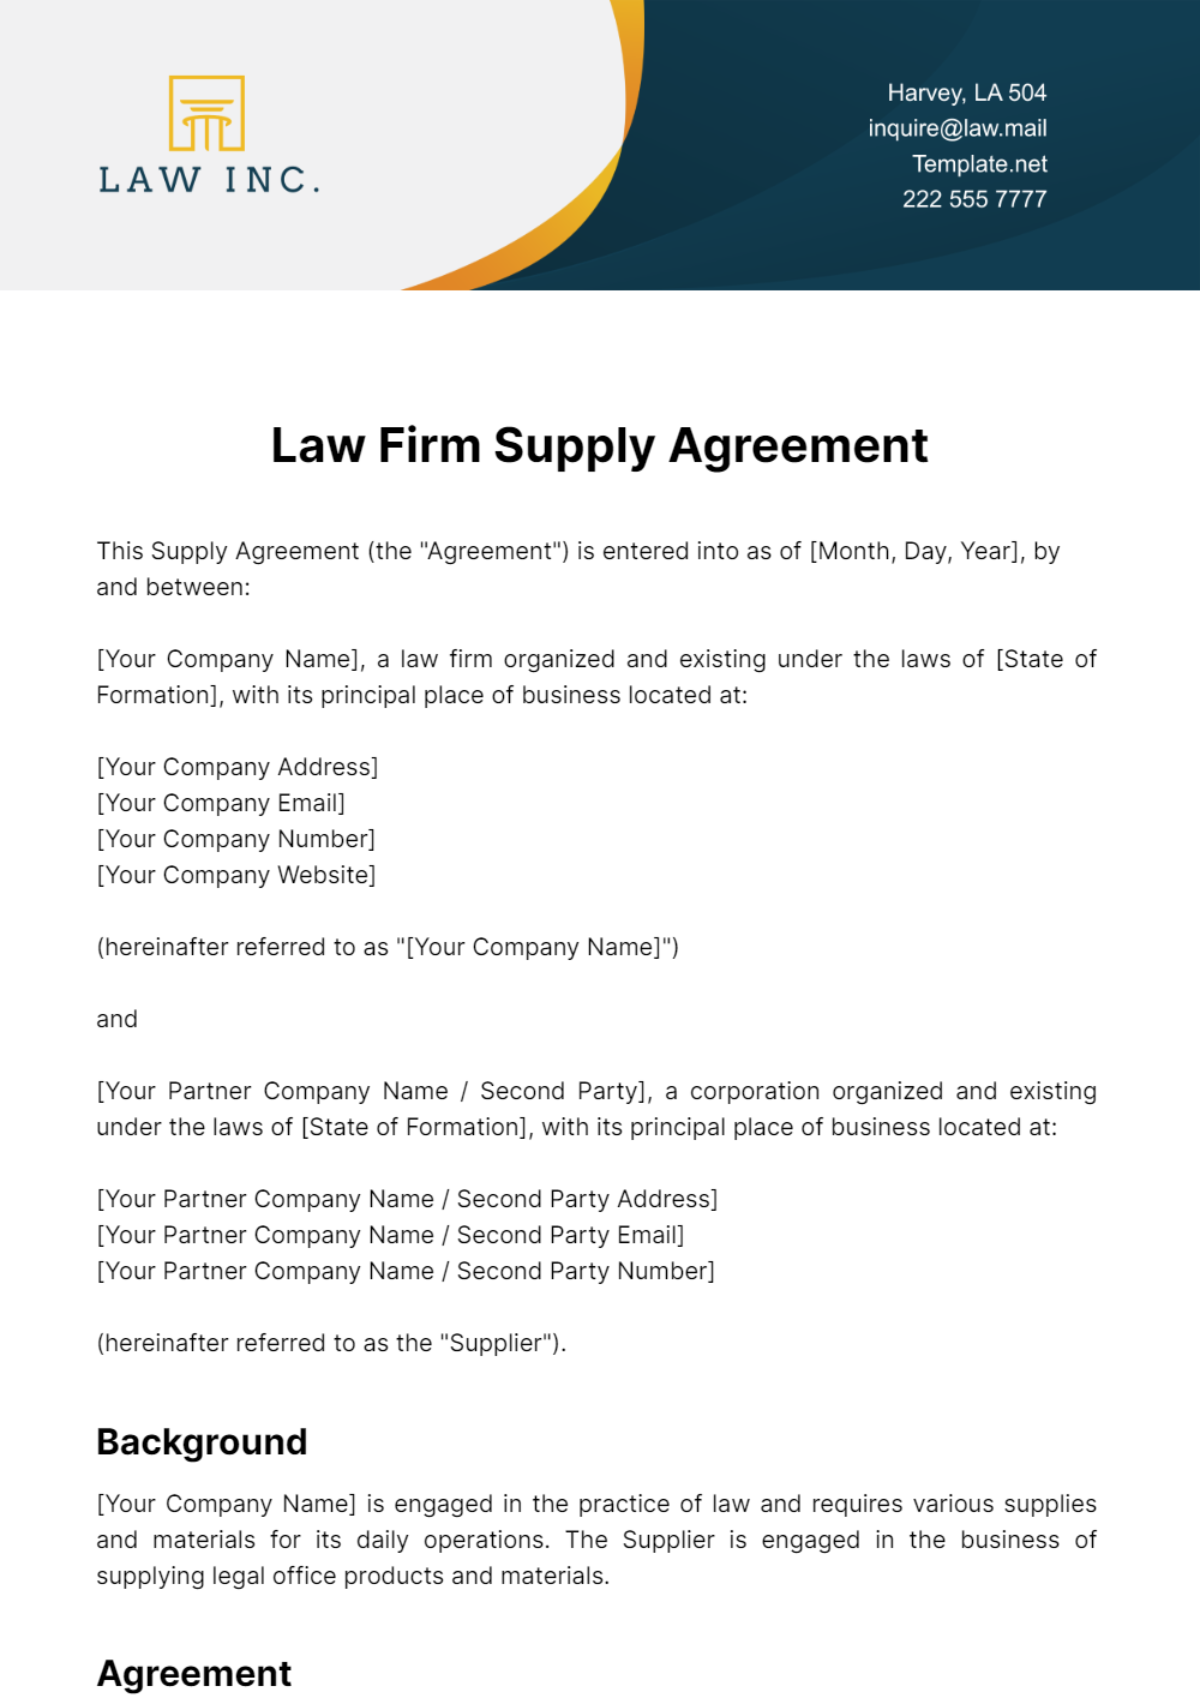 Law Firm Supply Agreement Template